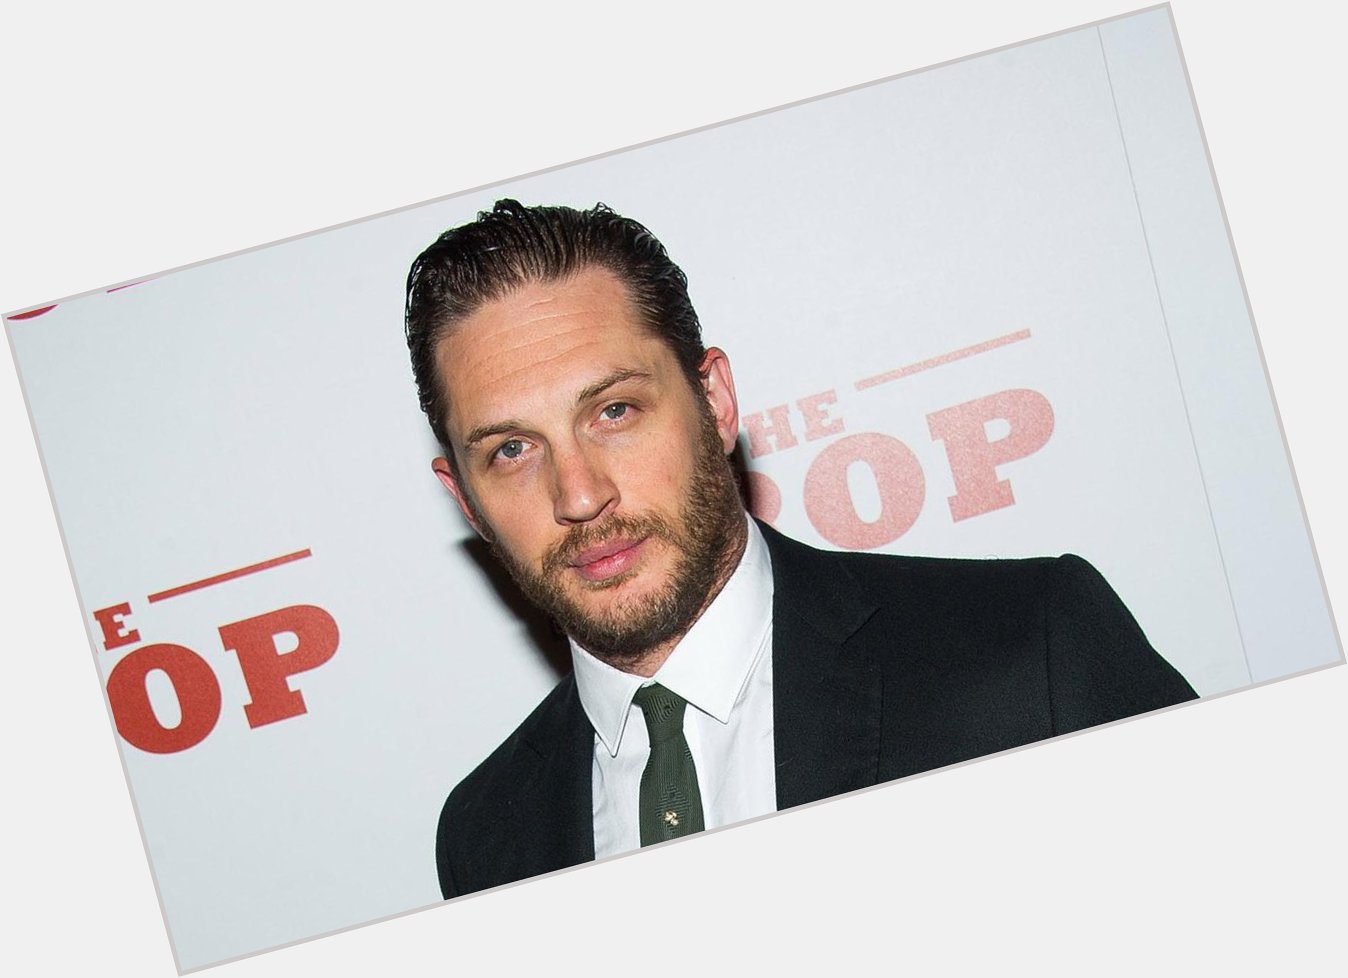 Happy Birthday Tom Hardy! Have you seen Hardy as the Kray twins in Legend yet? 